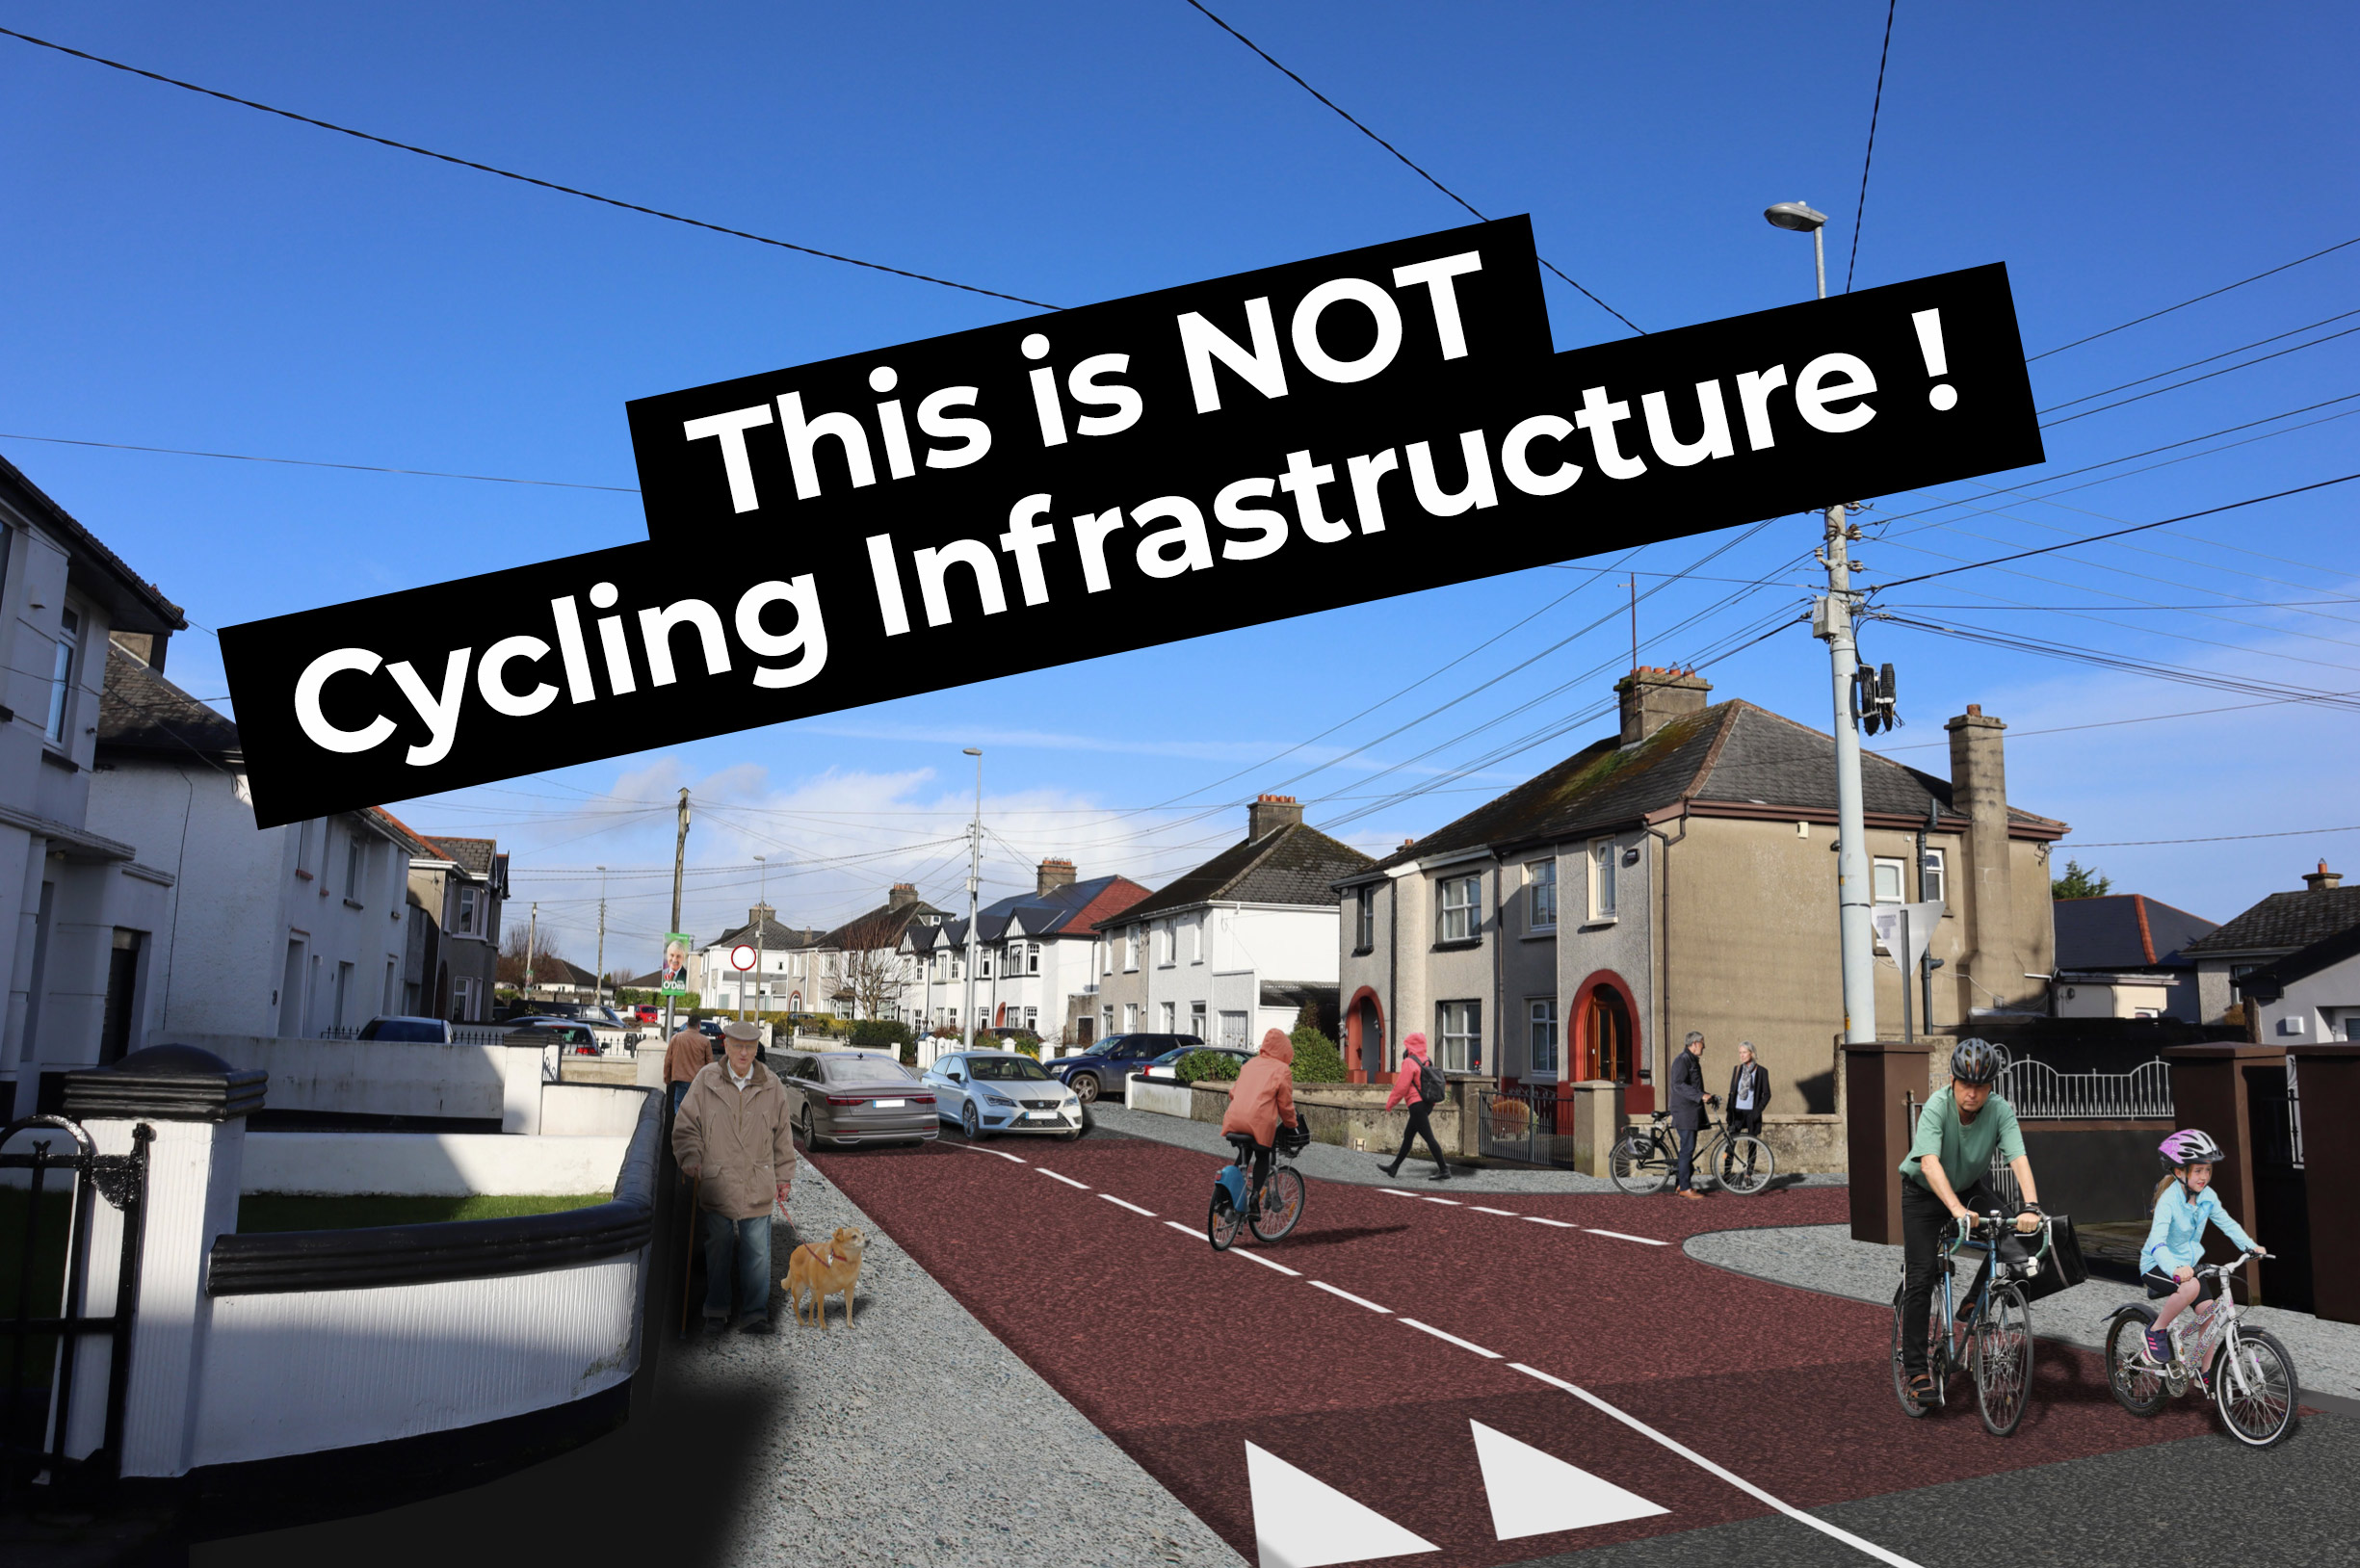 This is not cycling infrastructure